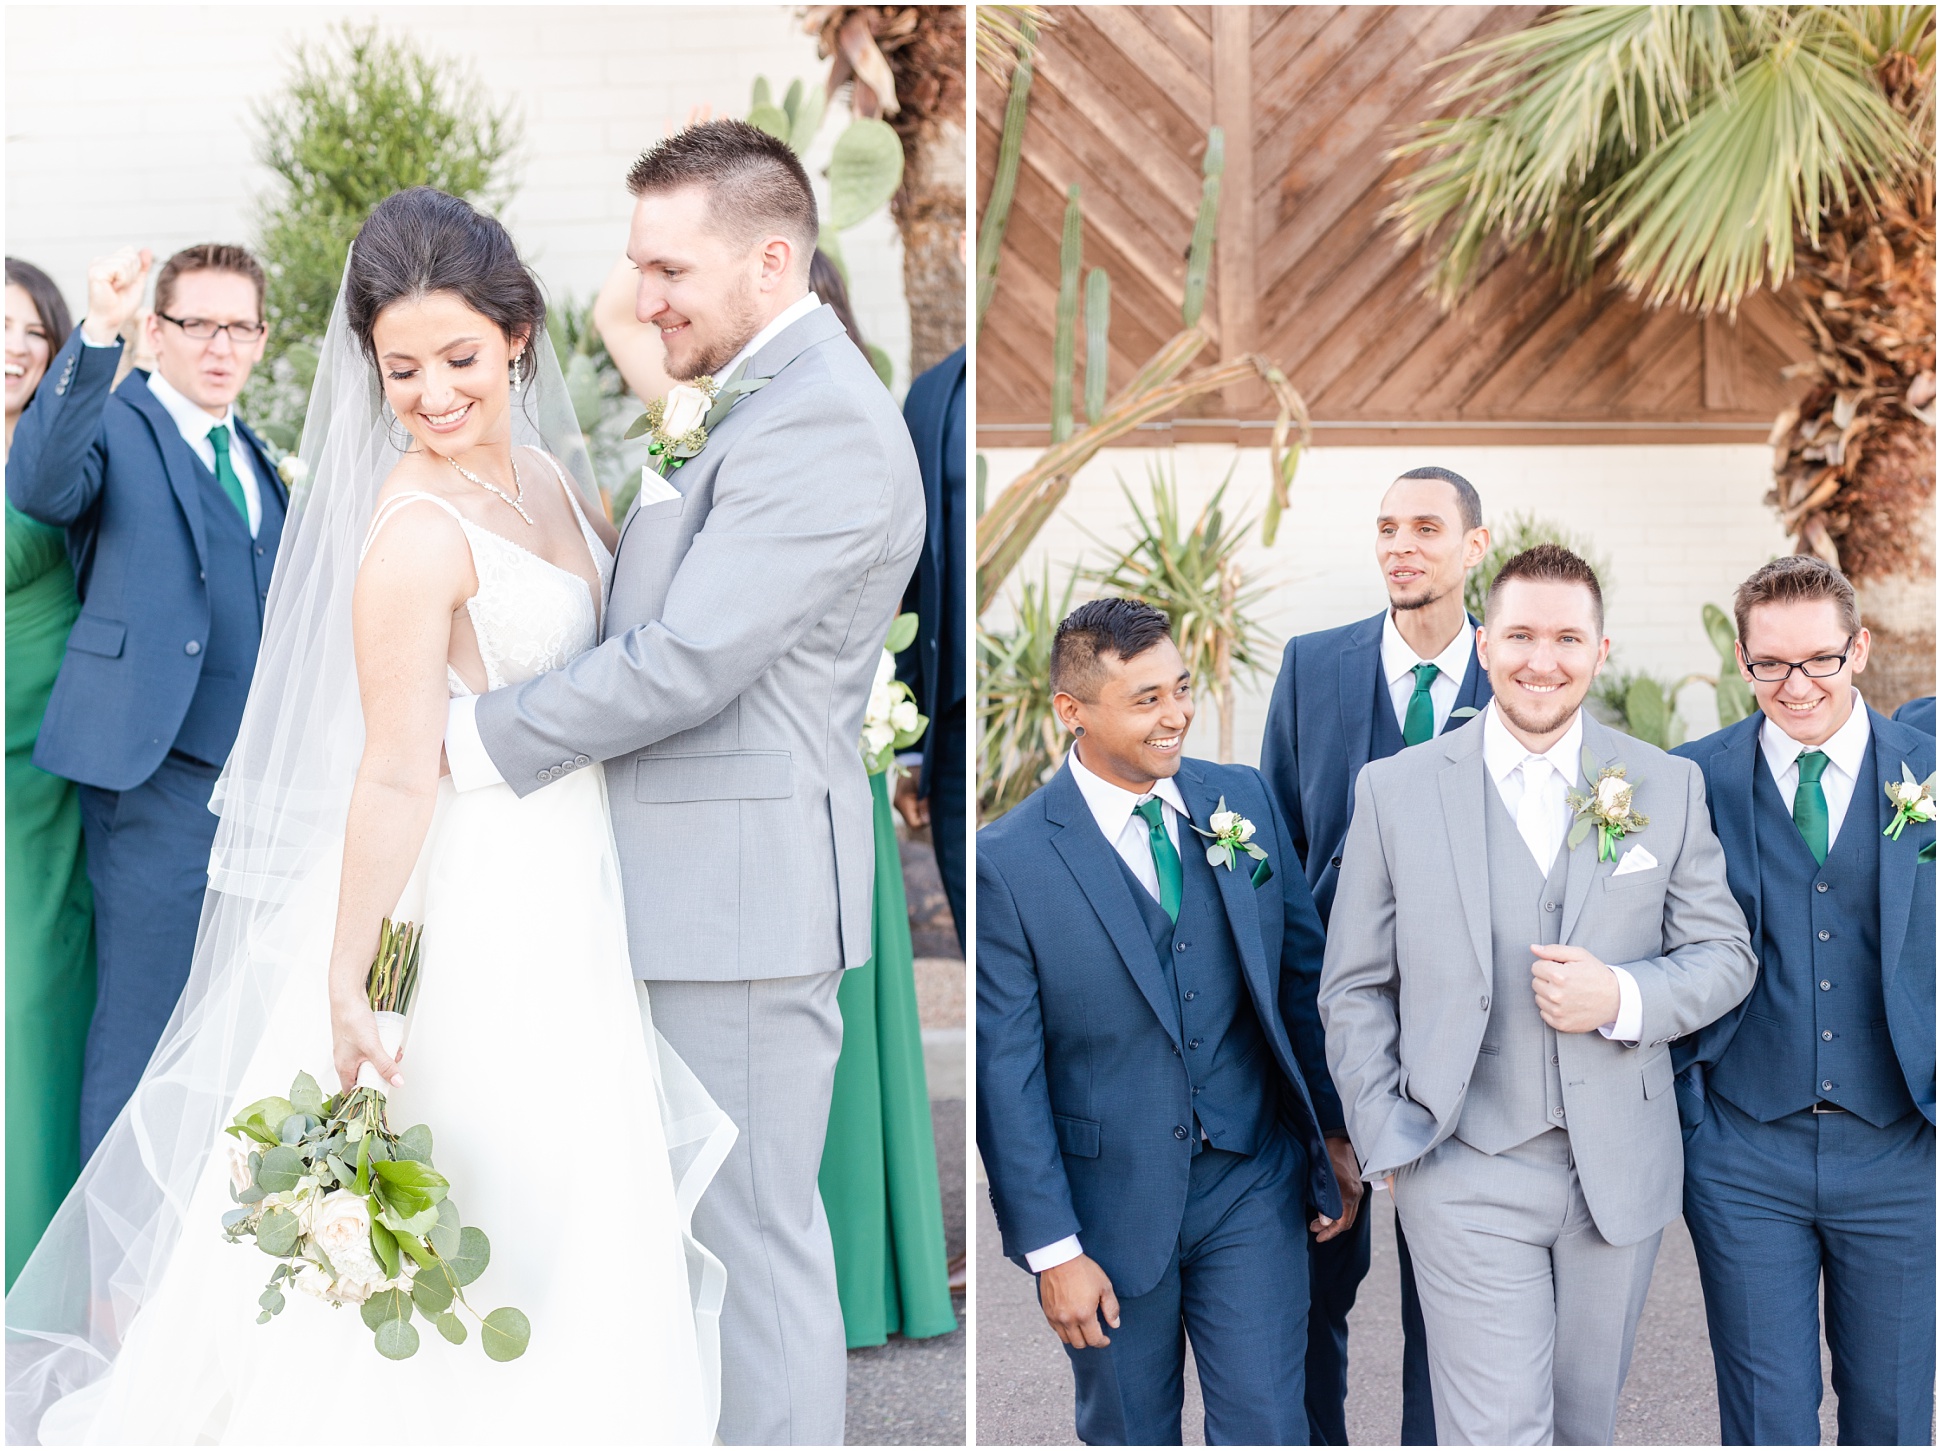 Groom holding Bride's waist with bridesmaids and groomsmen in background, Group photo of Groom and groomsmen 